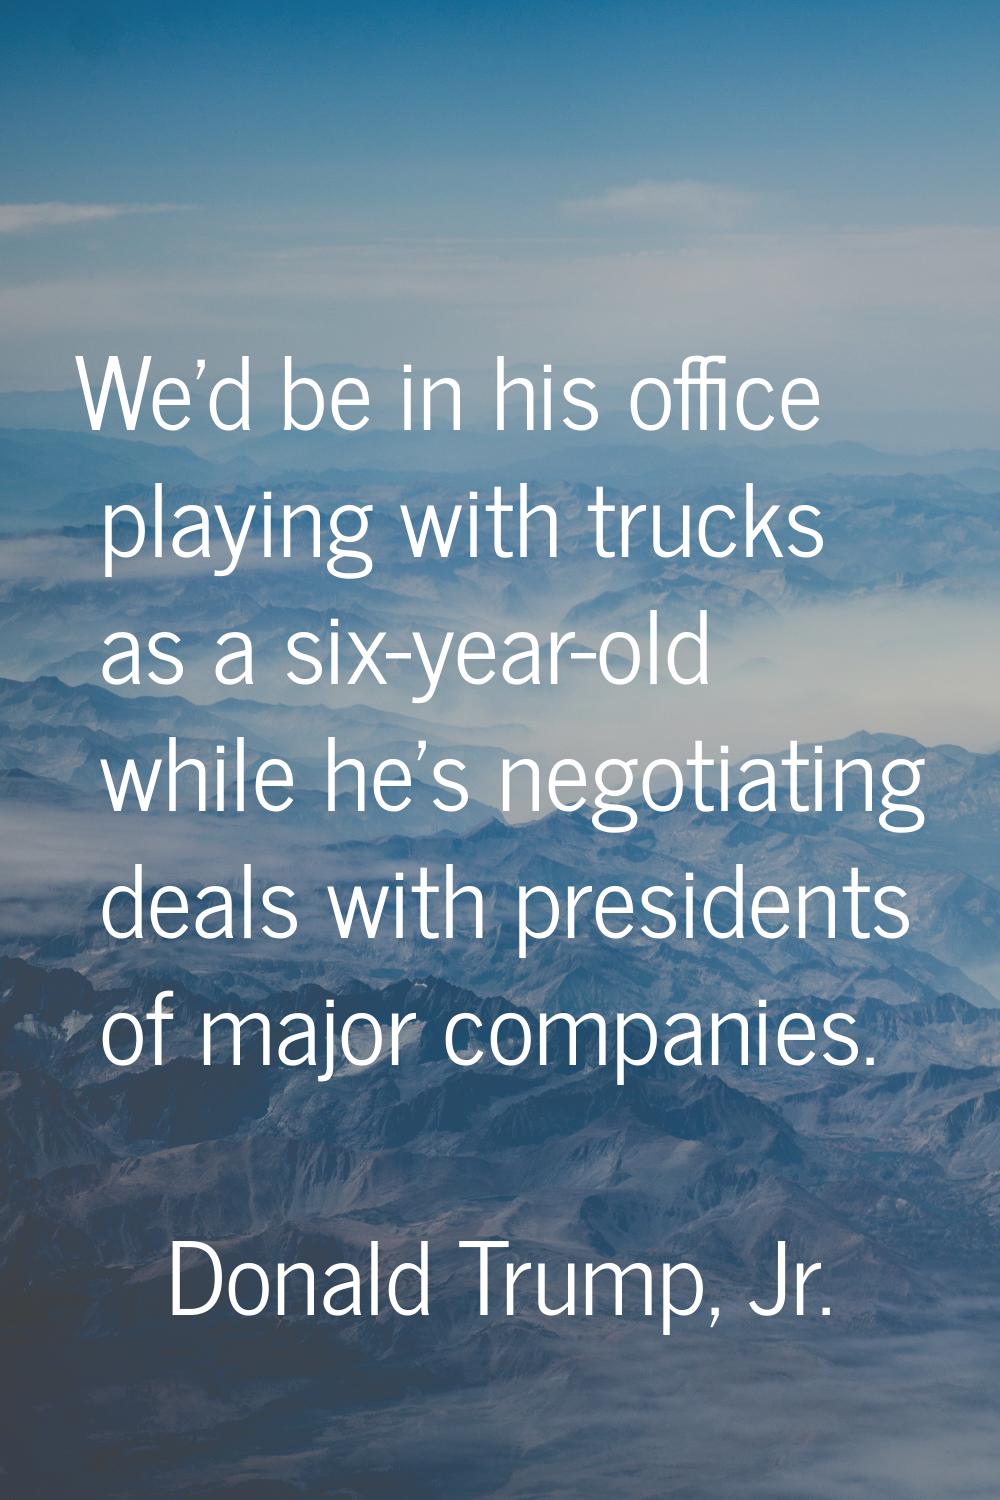 We'd be in his office playing with trucks as a six-year-old while he's negotiating deals with presi